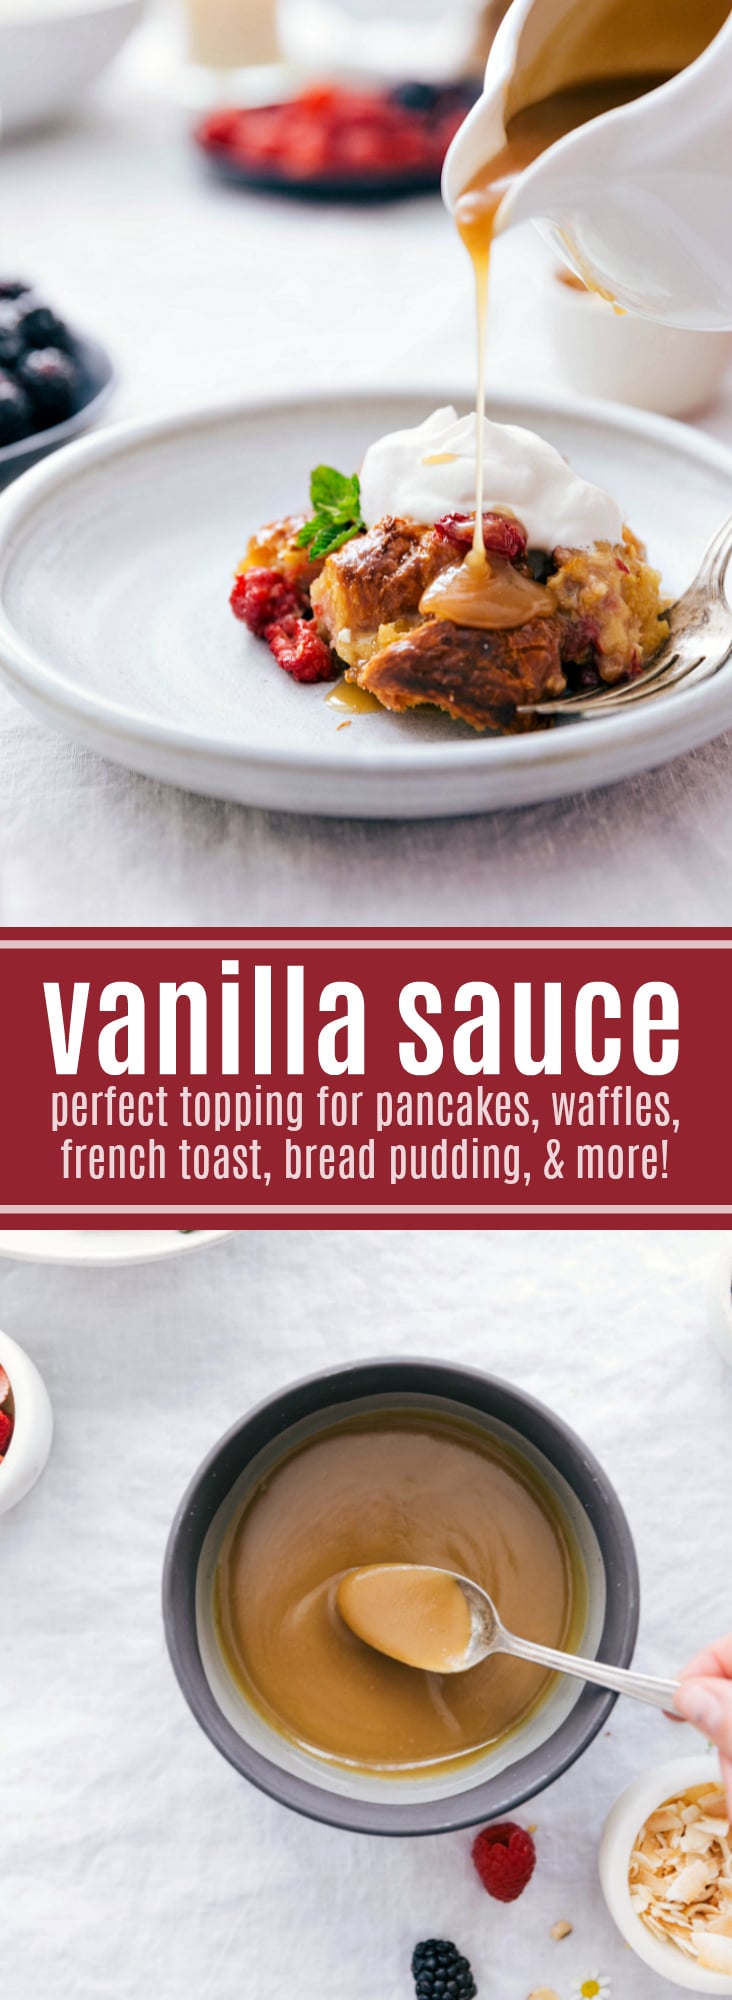 This simple stovetop vanilla sauce requires only 5 ingredients and less than 10 minutes prep time! Perfect for bread pudding, french toast, pancakes, etc.! via chelseasmessyapron.com #breakfast #brunch #vanilla #sauce #syrup #easy #quick #recipe #sweet #dessert